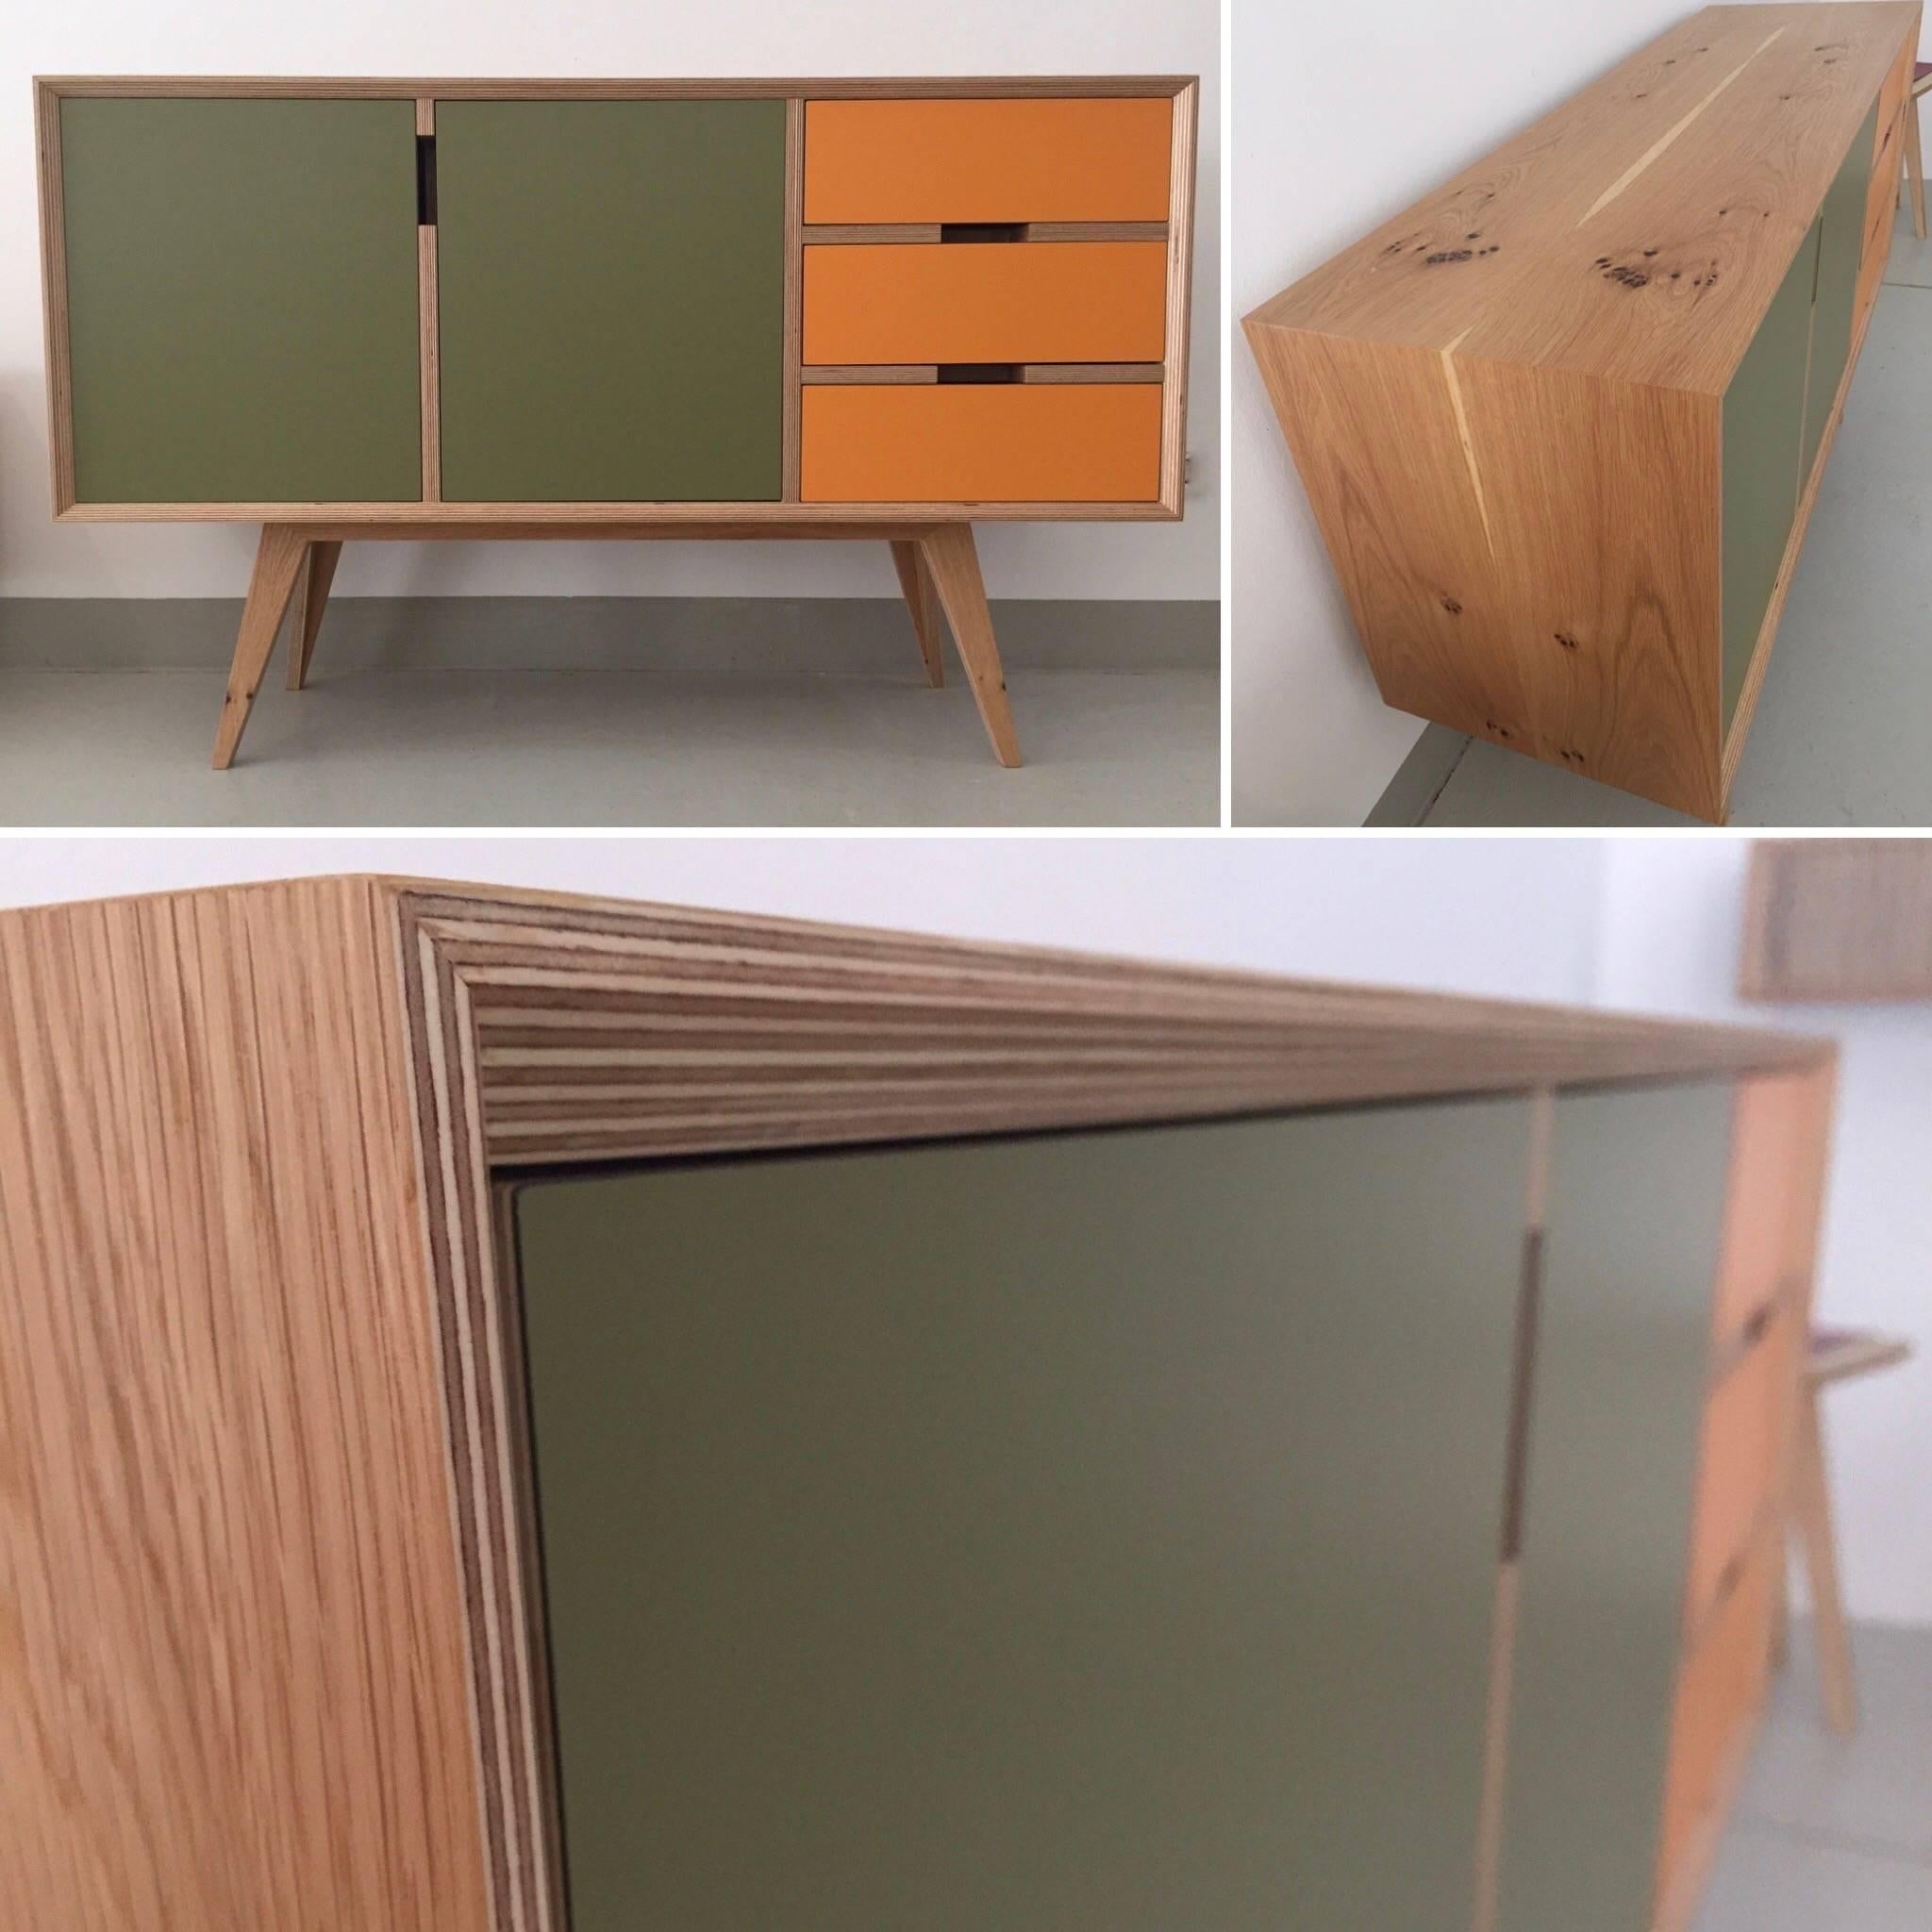 Otto Sideboard, Hand Veneered Plywood in European Oak/Orange and Green In New Condition For Sale In Vienna, AT